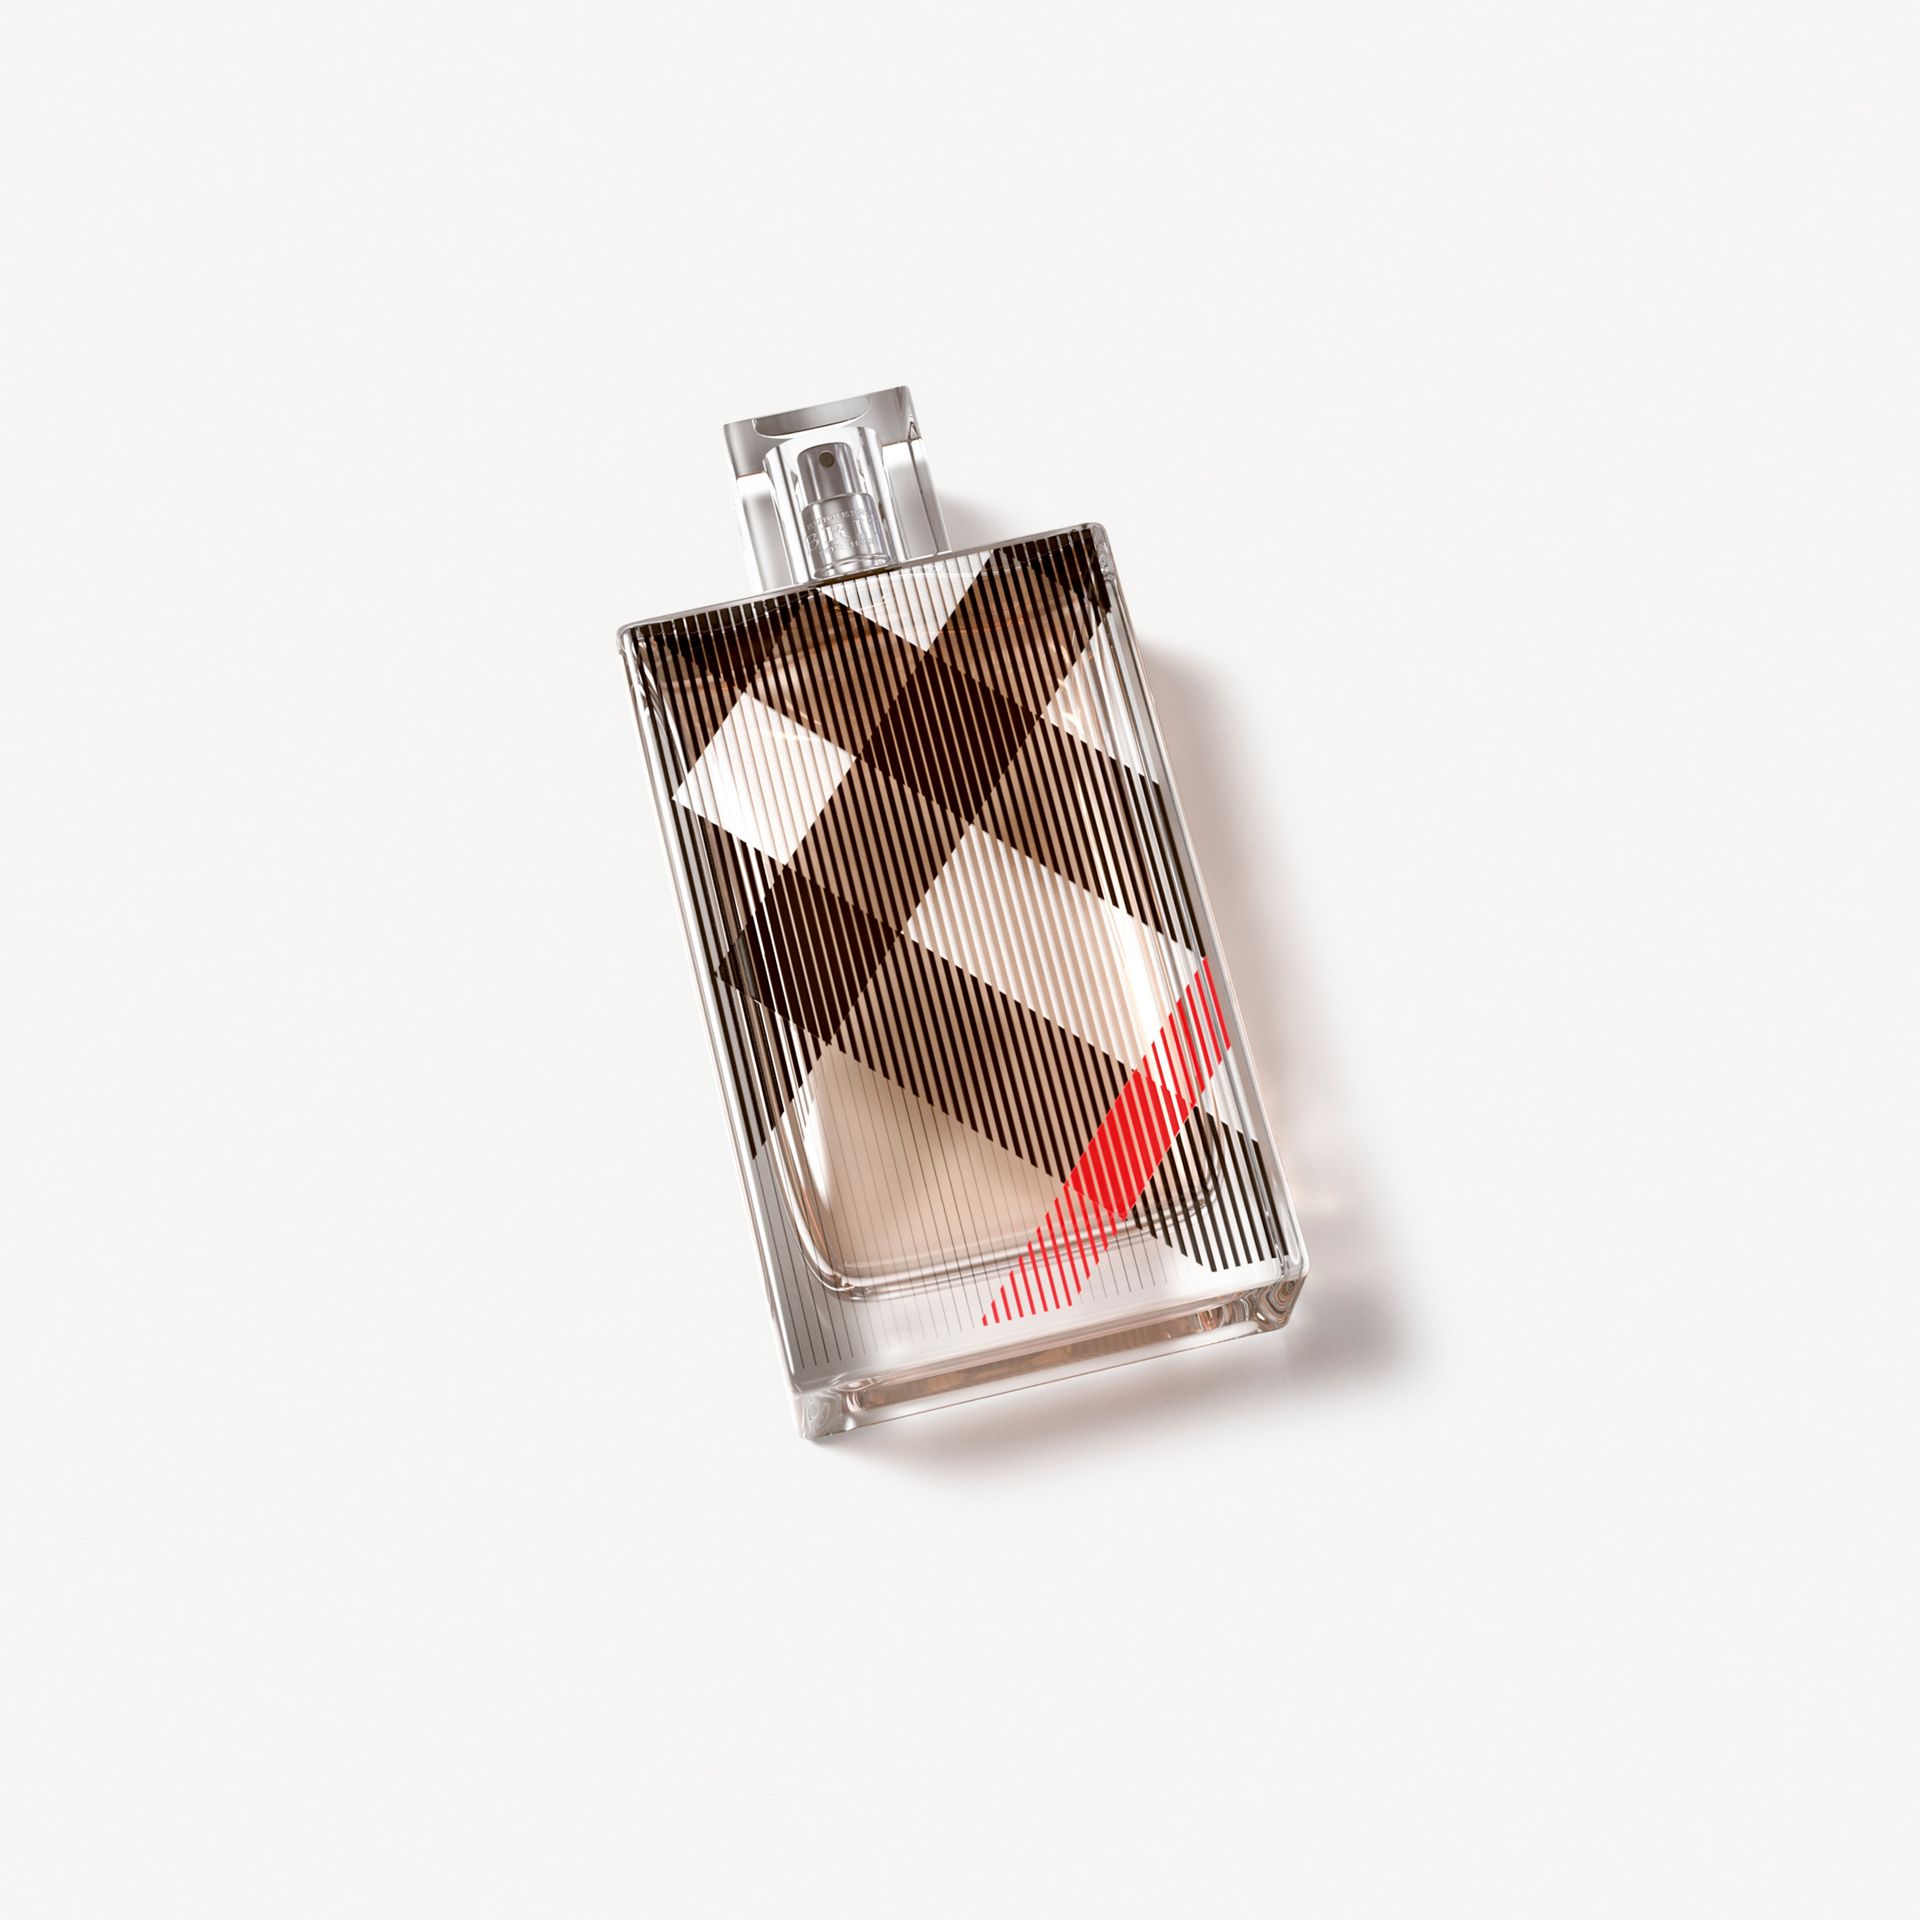 burberry brit for her 100ml